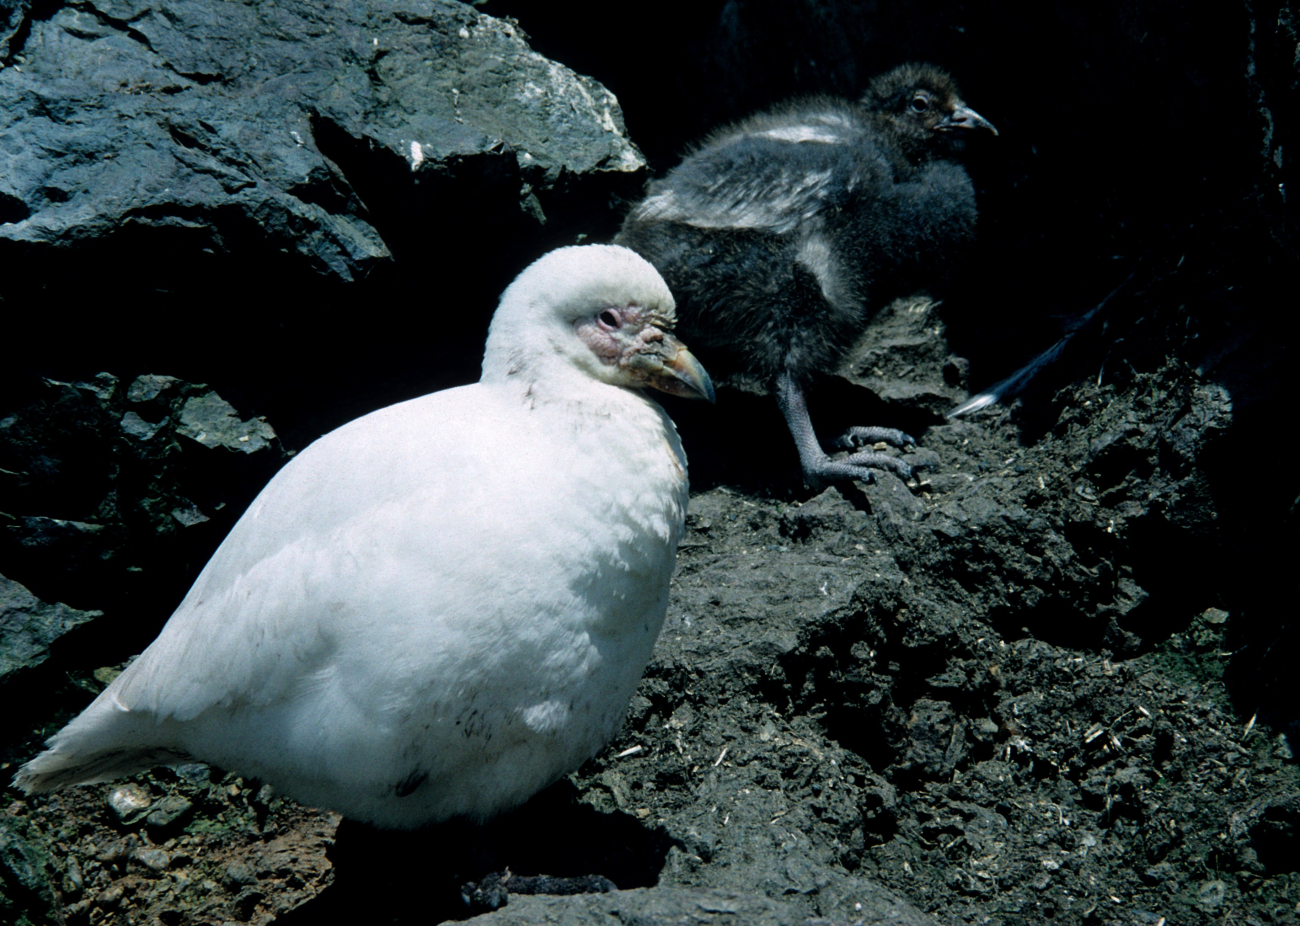 A snowy sheatbill and its chick are seen walking amidst the rocks